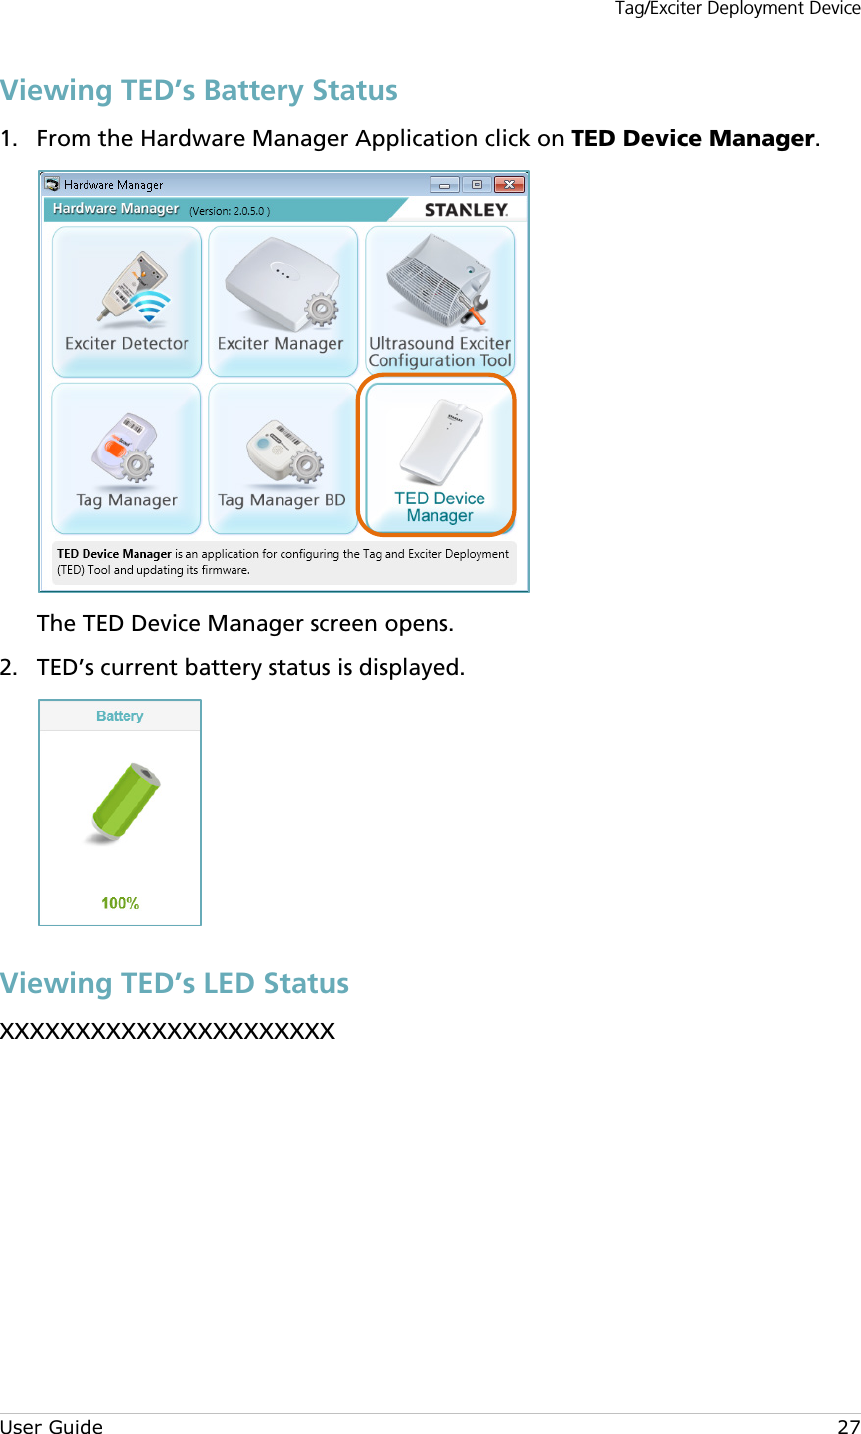 Tag/Exciter Deployment Device User Guide 27 Viewing TED’s Battery Status  From the Hardware Manager Application click on TED Device Manager. 1. The TED Device Manager screen opens.  TED’s current battery status is displayed. 2. Viewing TED’s LED Status XXXXXXXXXXXXXXXXXXXXXX      